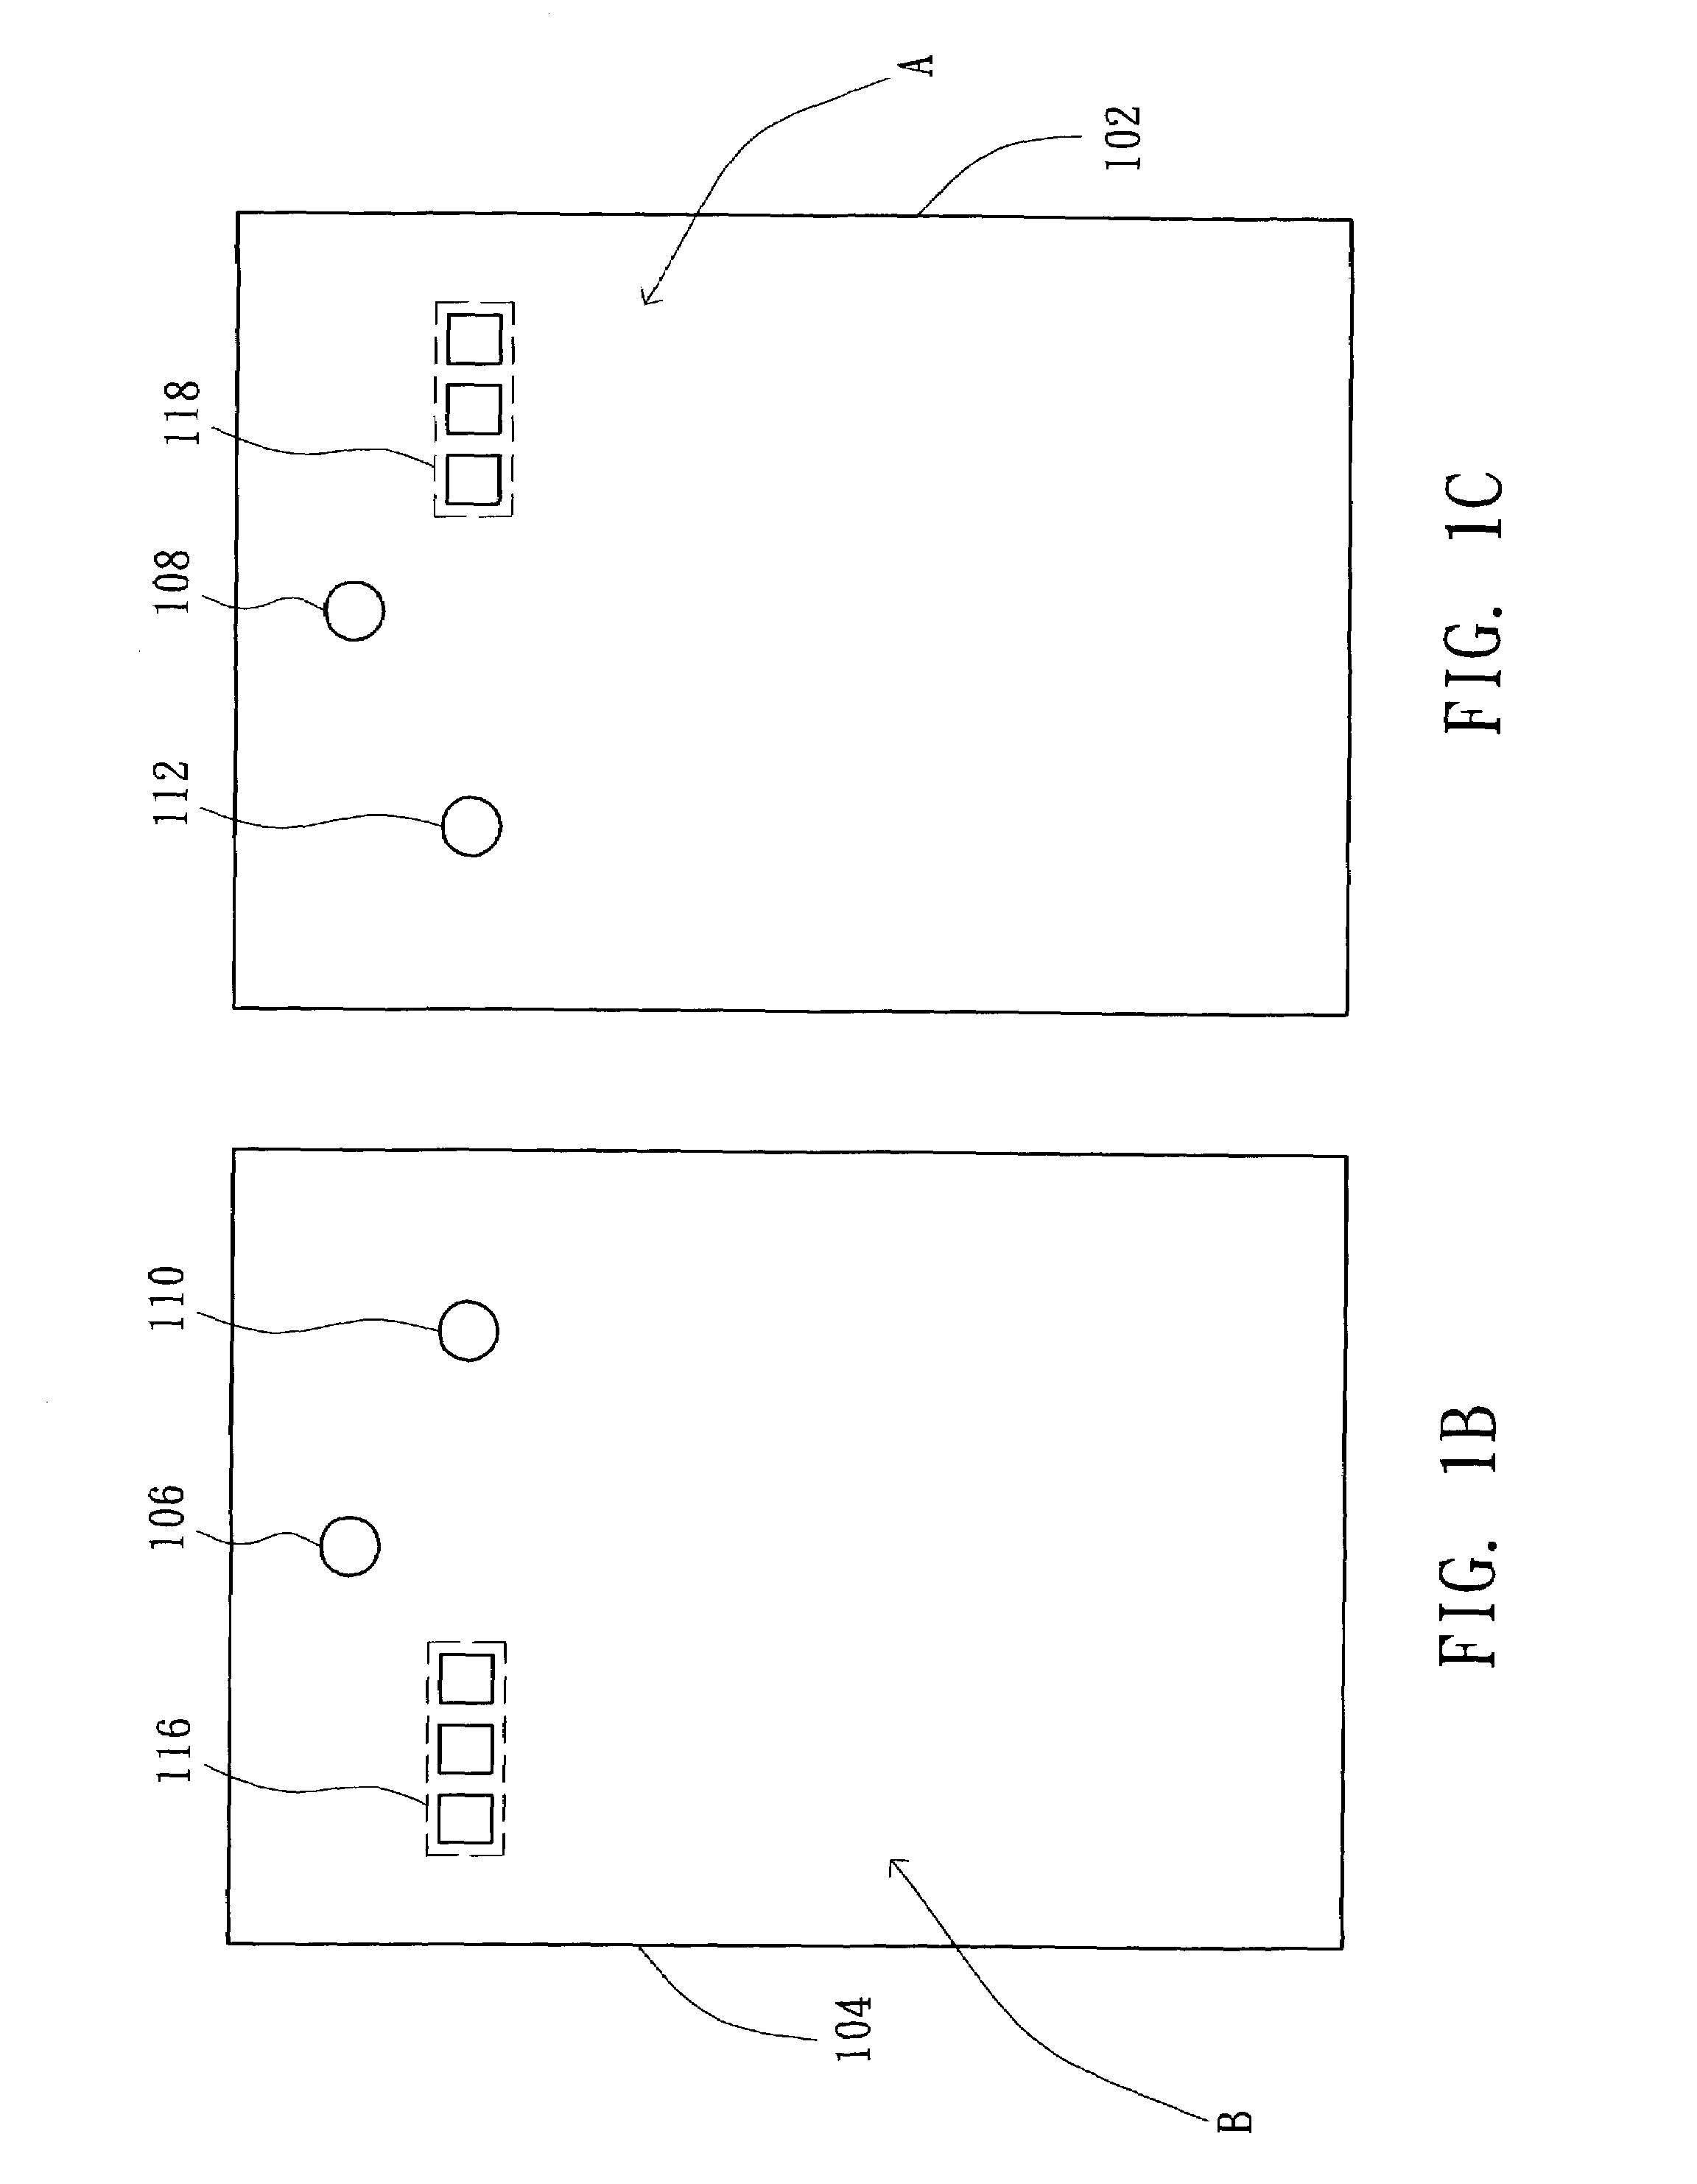 Portable electronic system equipped with a spare battery device